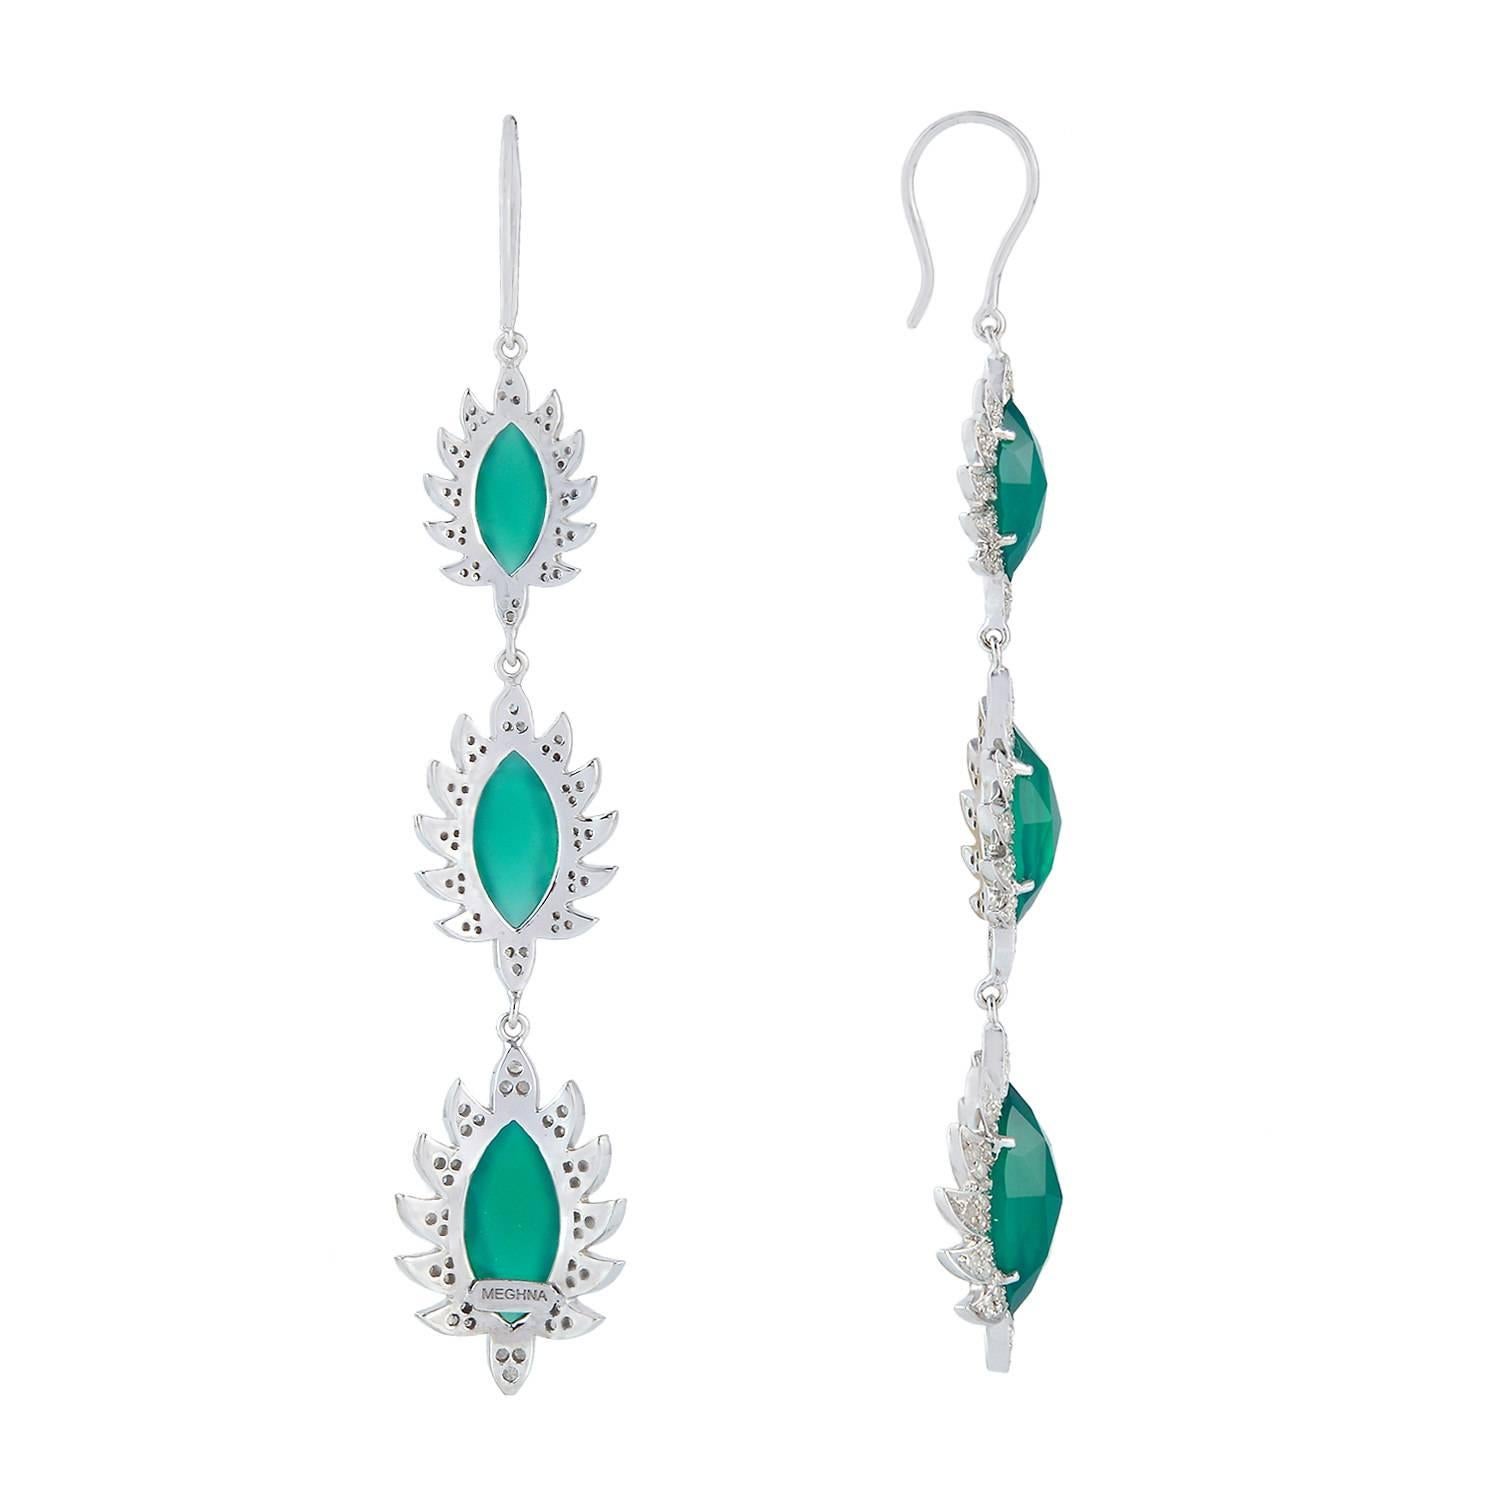 These beautiful triple drop earrings are cast in 18K gold and sterling silver. It is hand set in 11.73 carat turquoise and 1.54 carat of sparkling diamonds, french hook closures. Framed in signature 